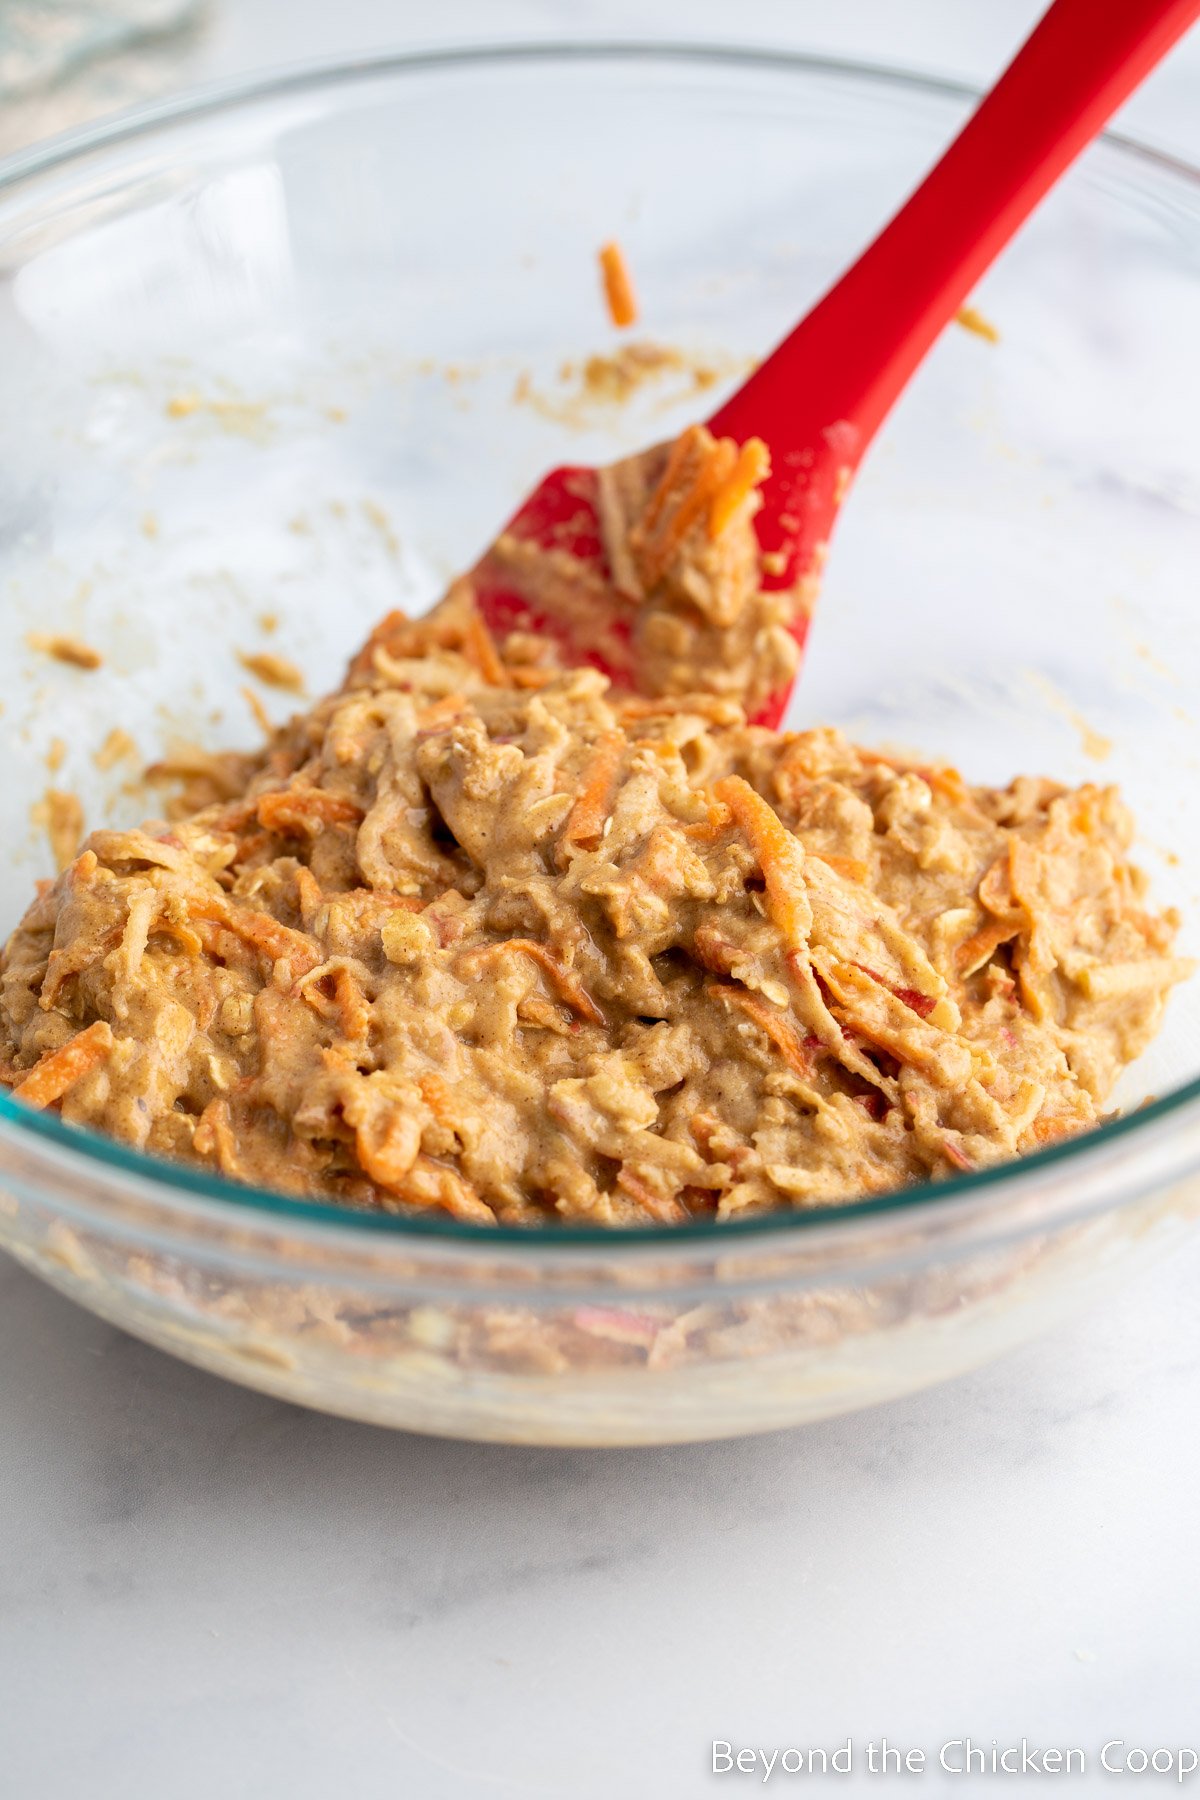 Carrot and apple muffin batter in a bowl with a red spatula.